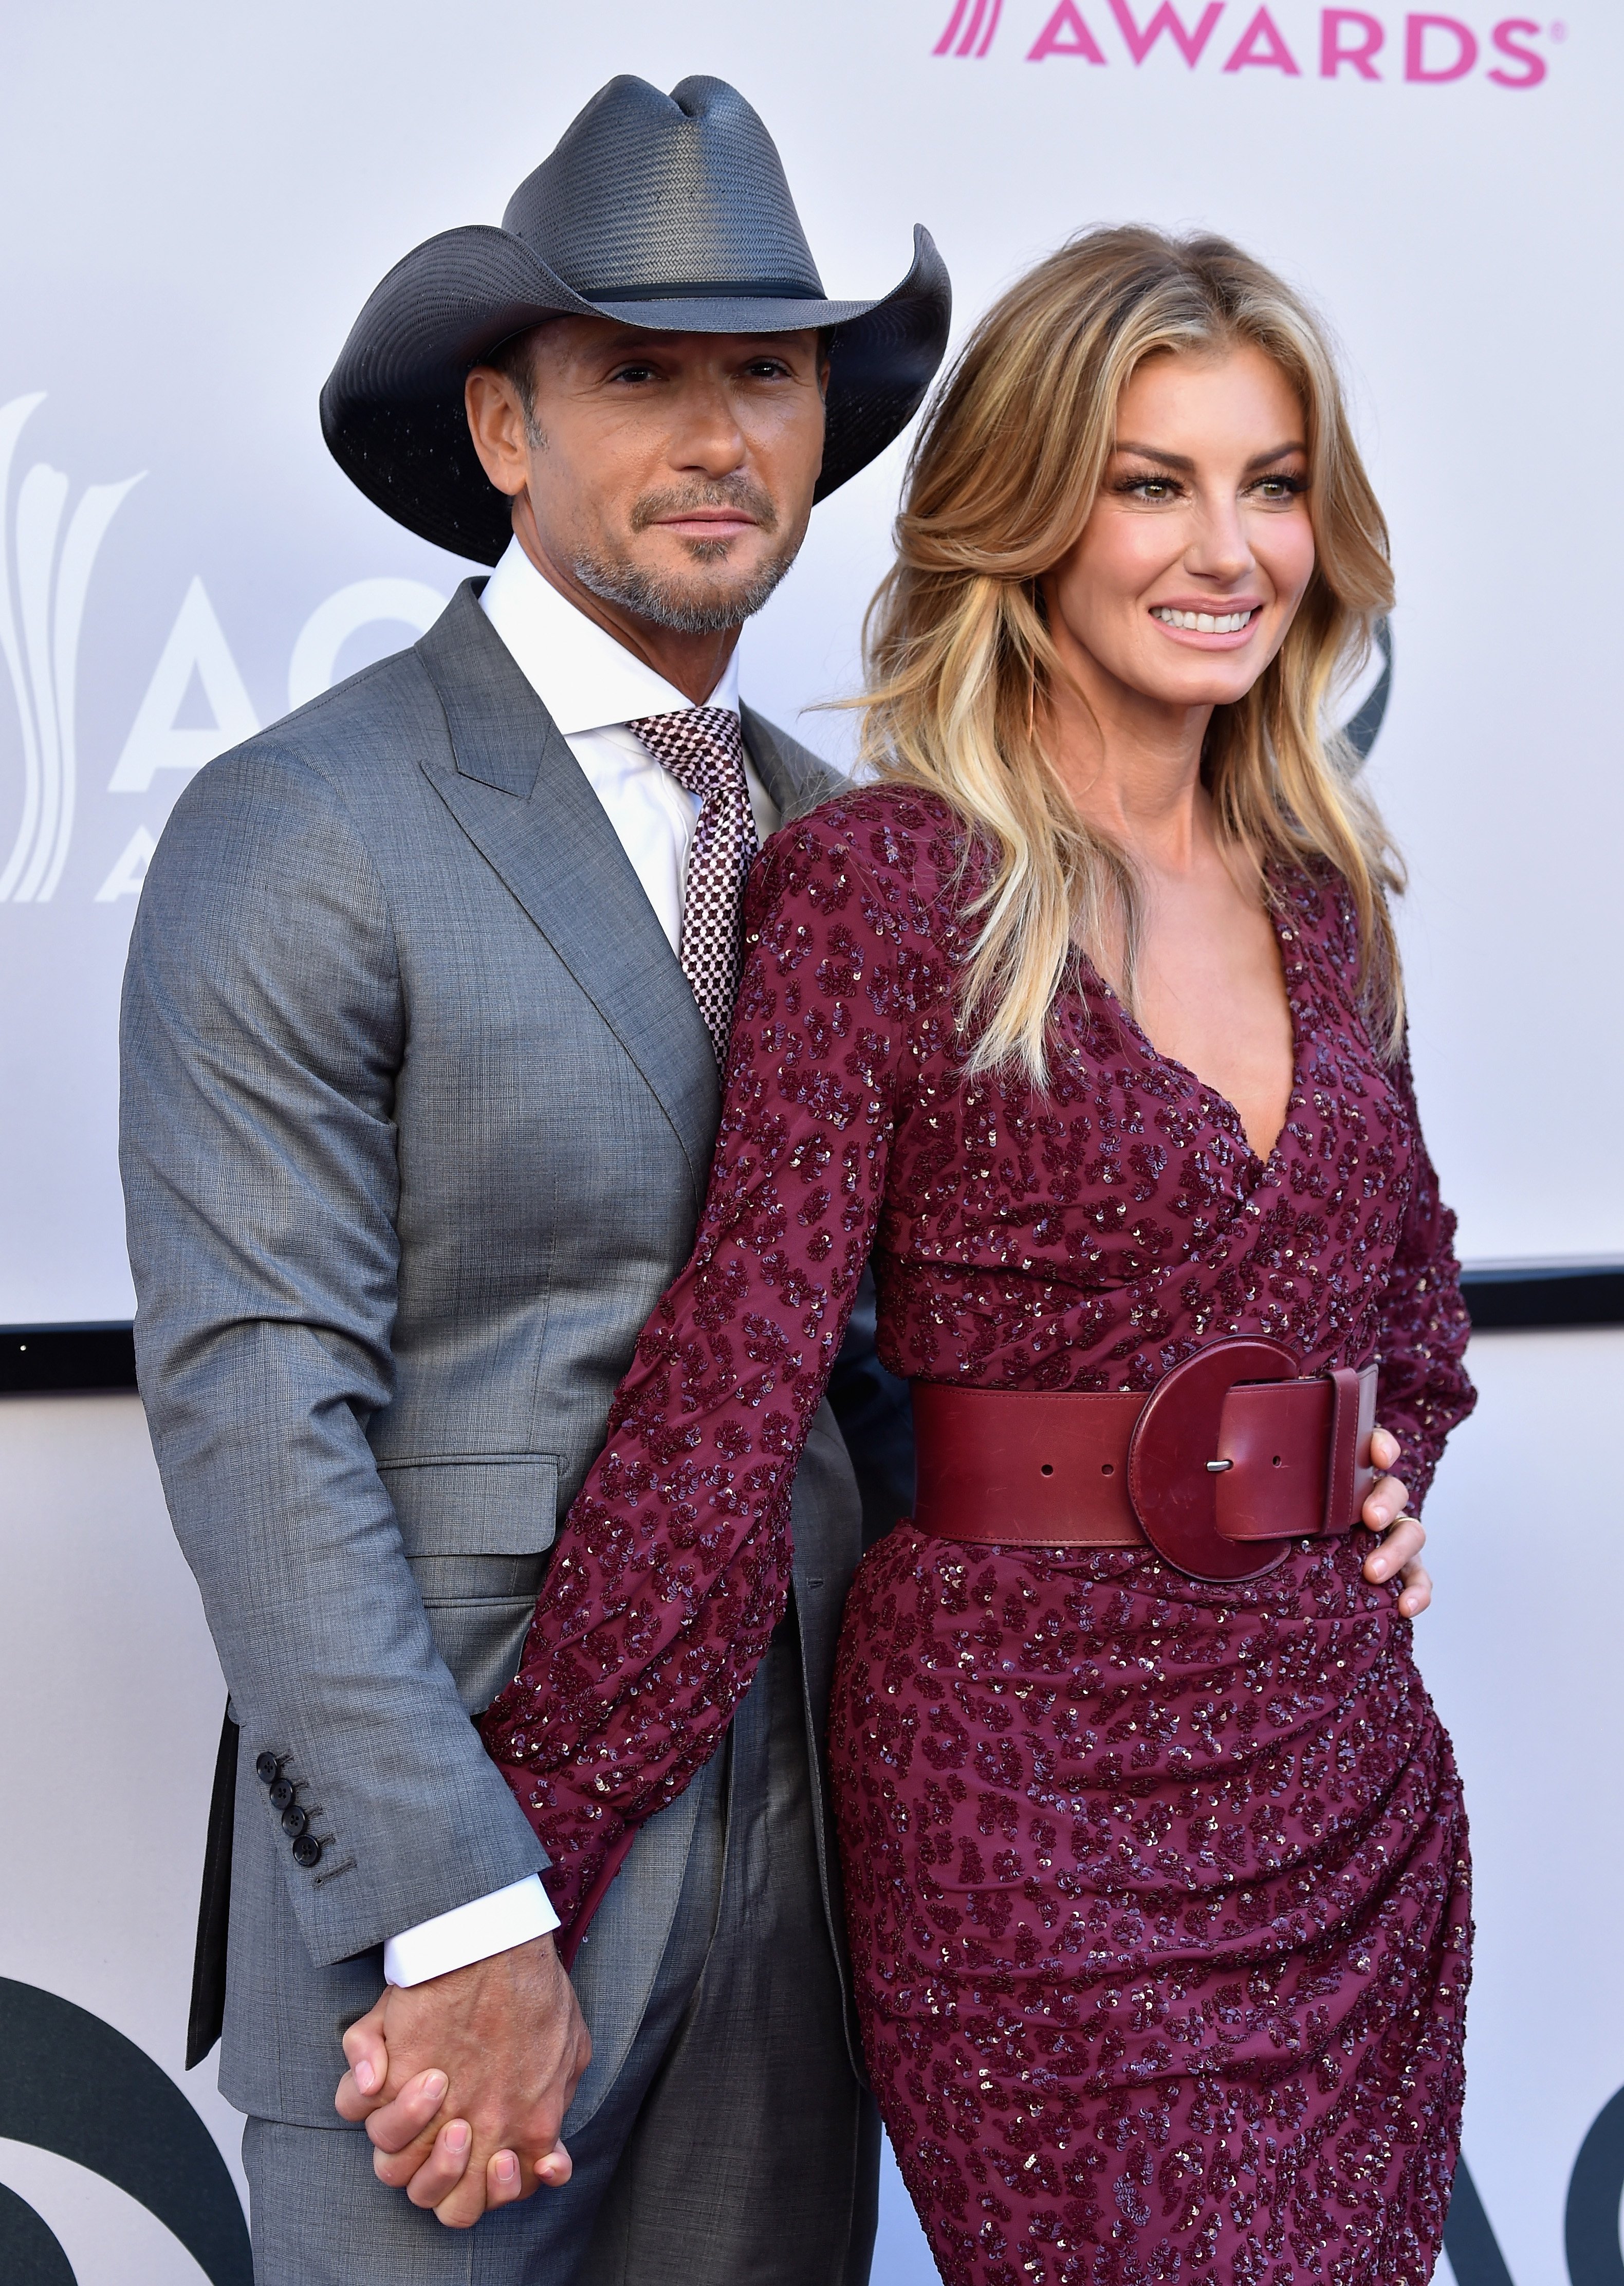 Tim McGraw and Faith Hill attend the 52nd Academy Of Country Music Awards at on April 2, 2017 | Photo: Getty Images.